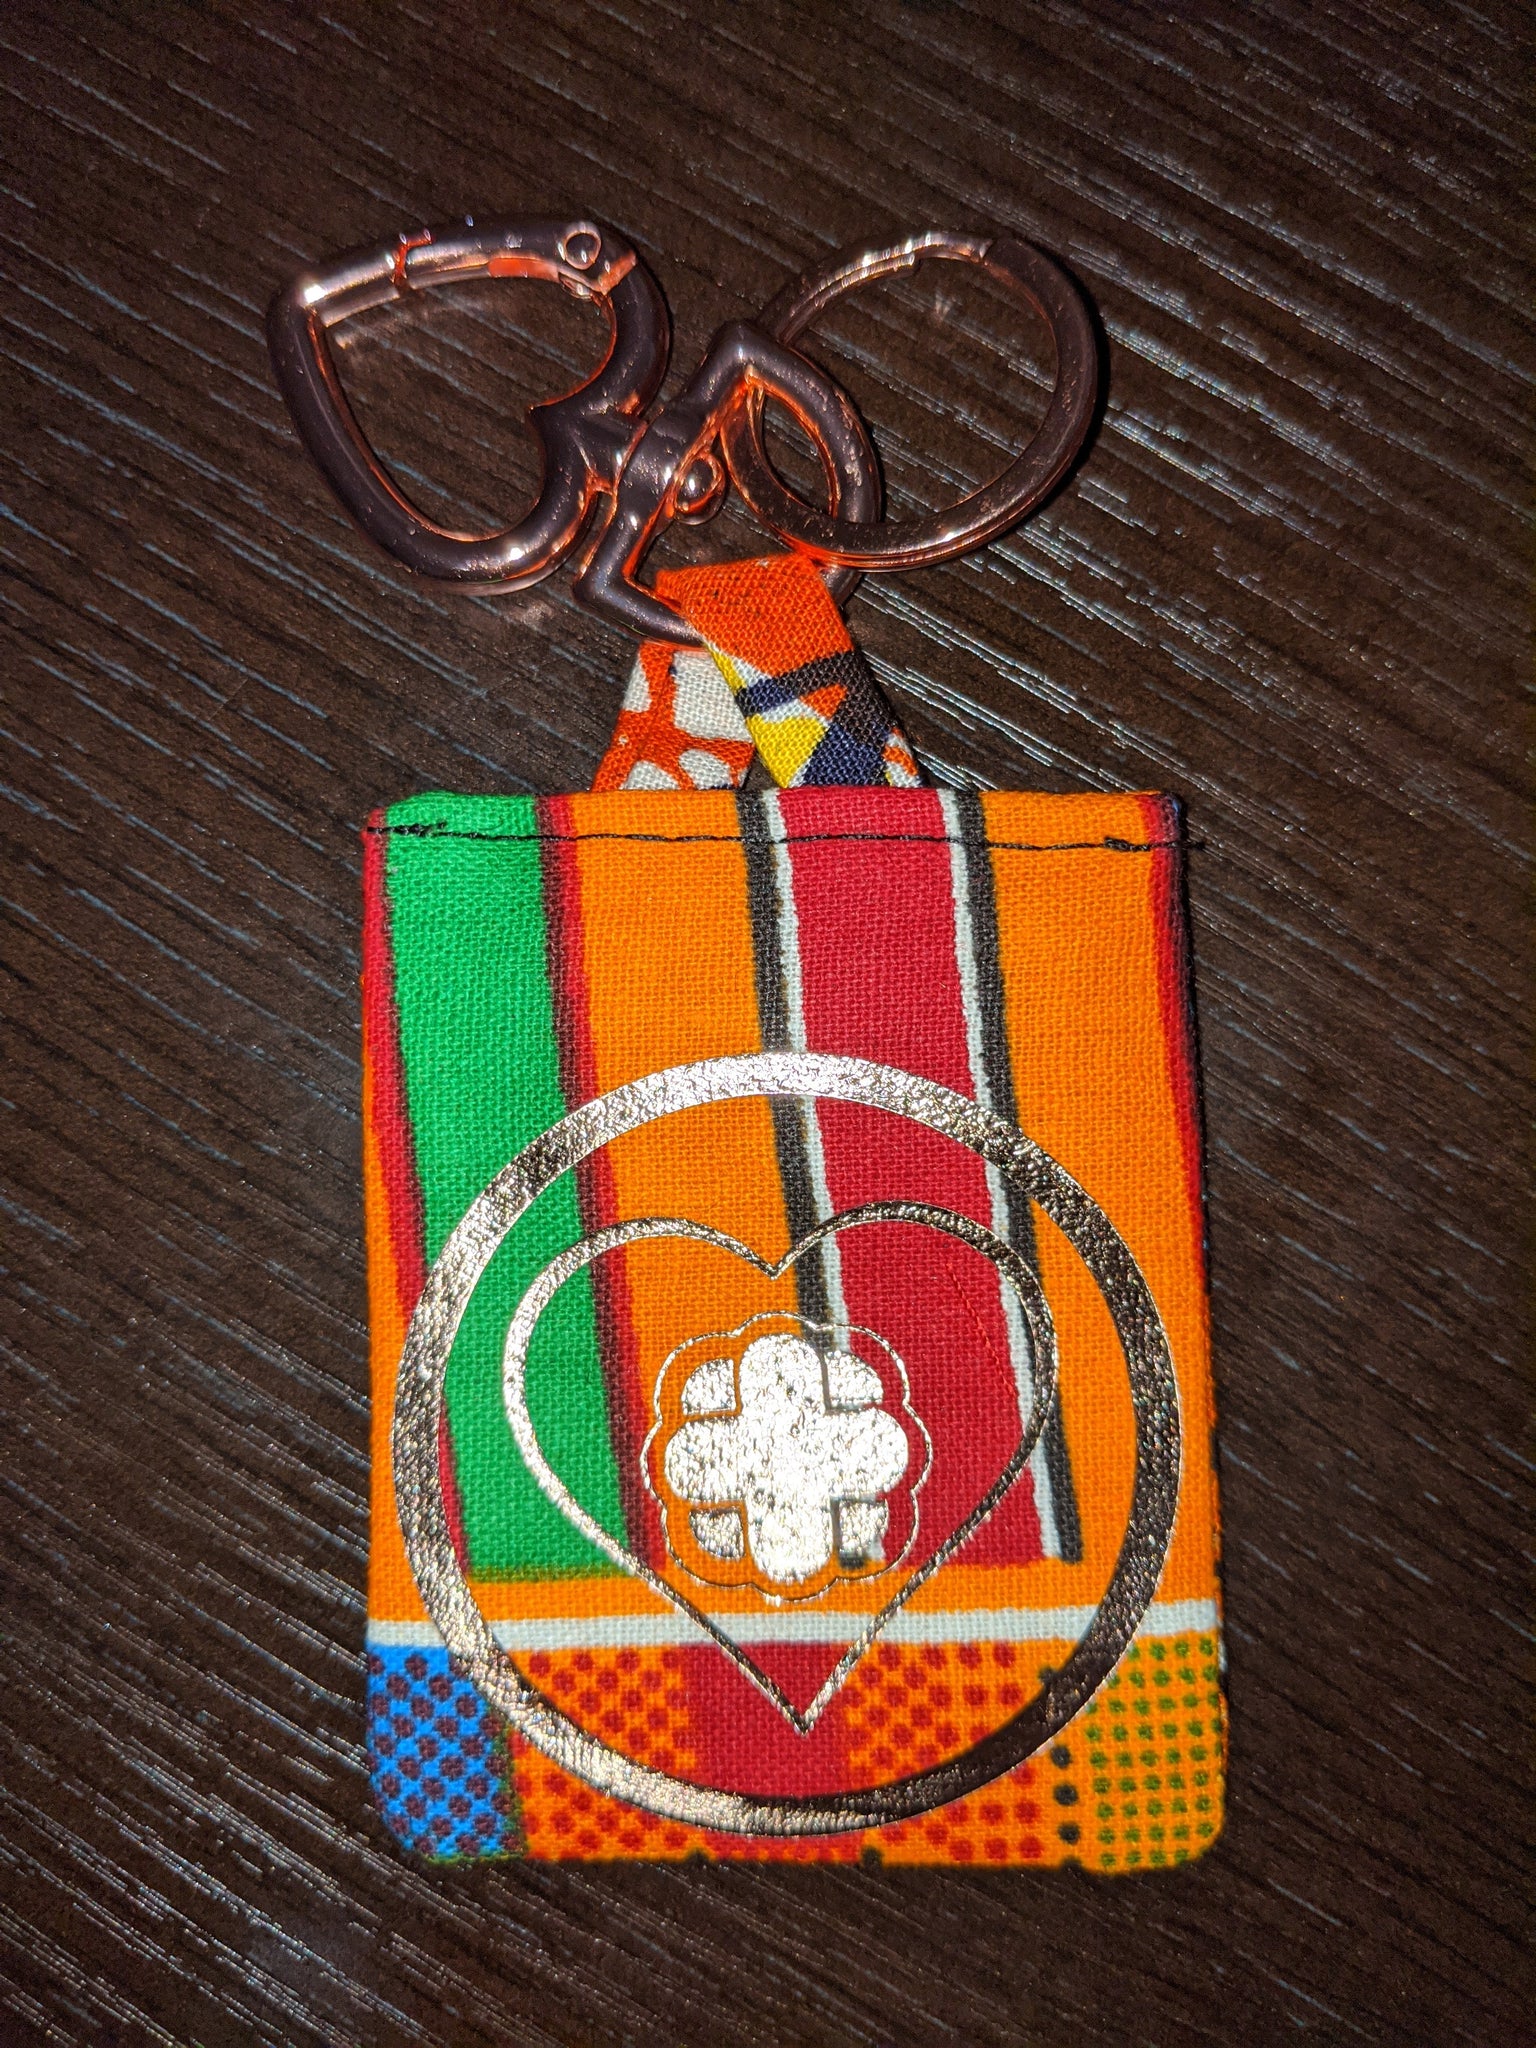 PYDJ COLLECTABLE KEYCHAIN - "Tote"